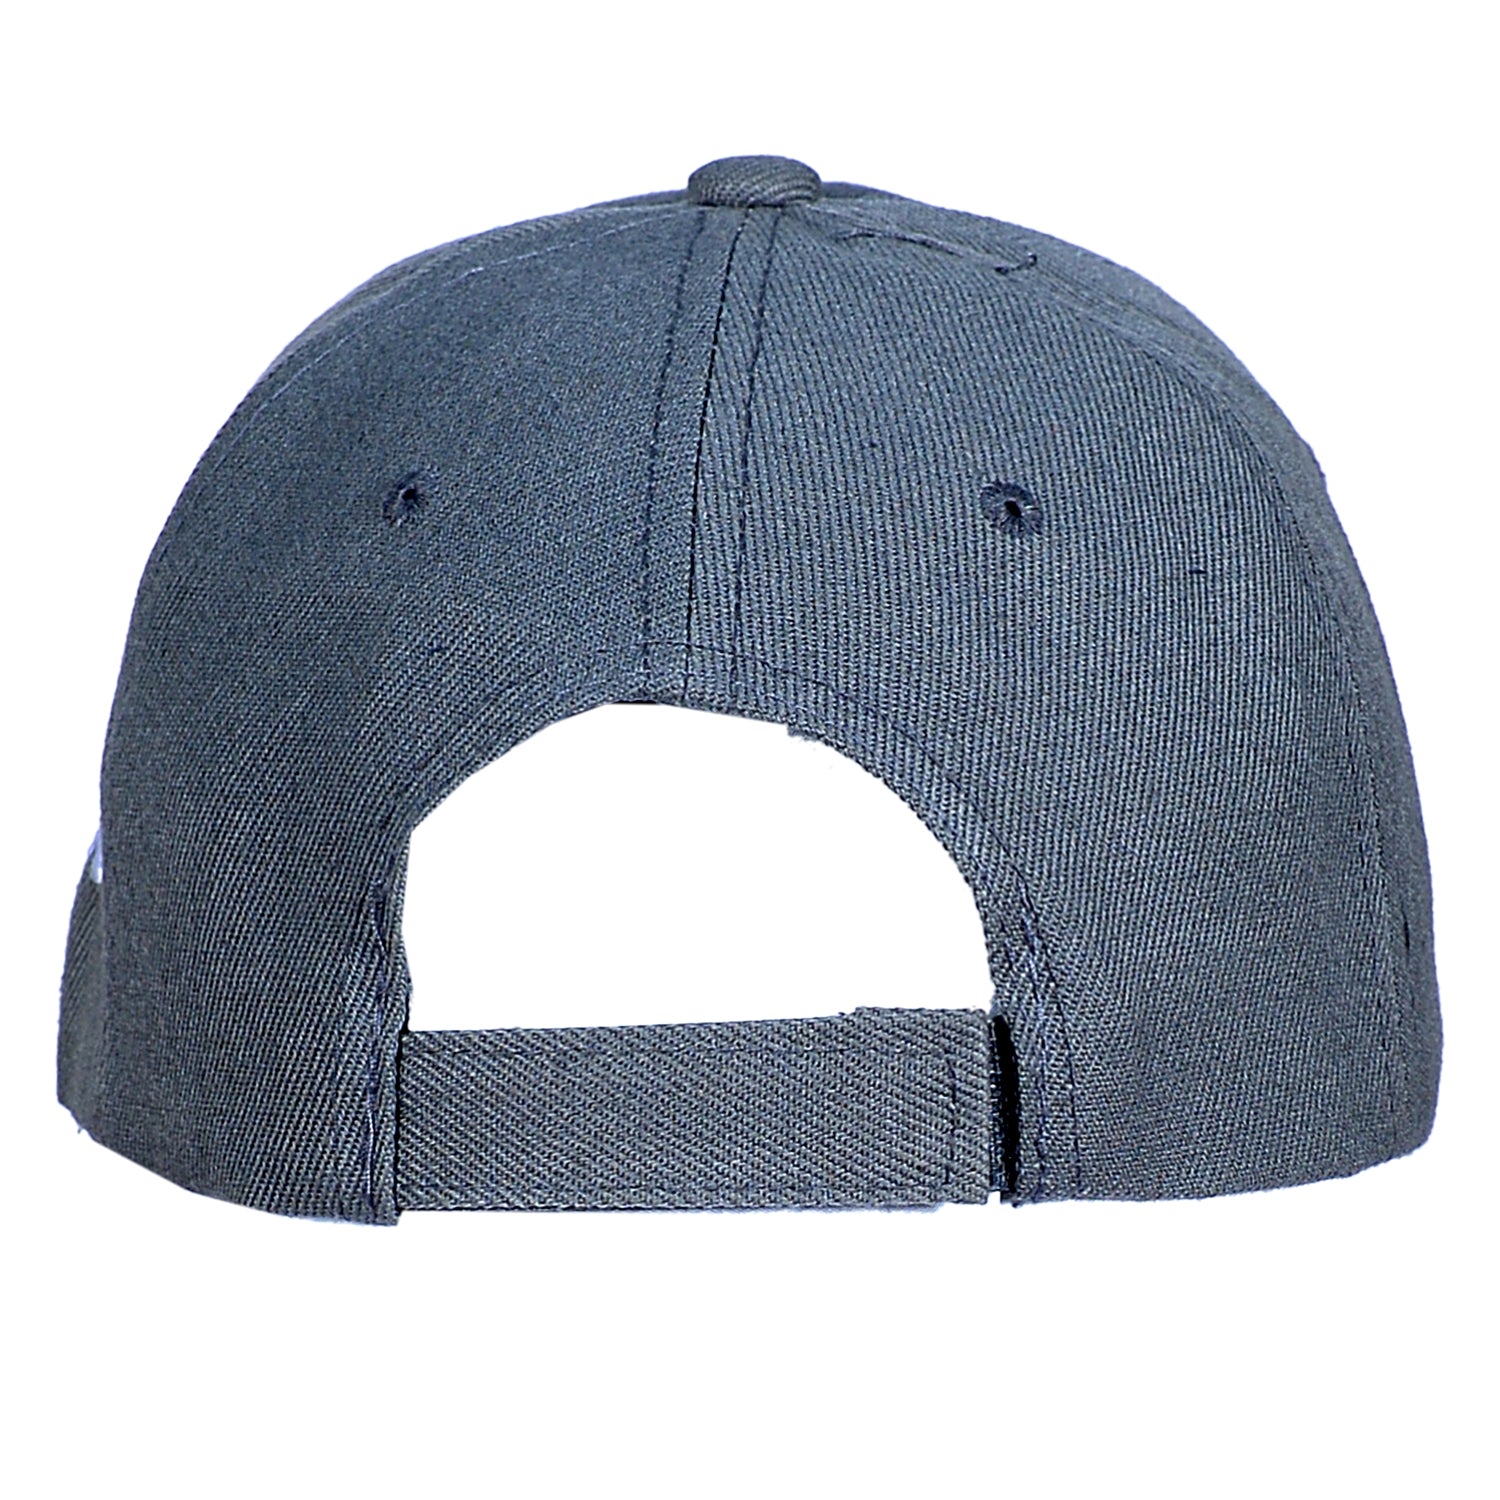 Relaxed Fit Performance Hat